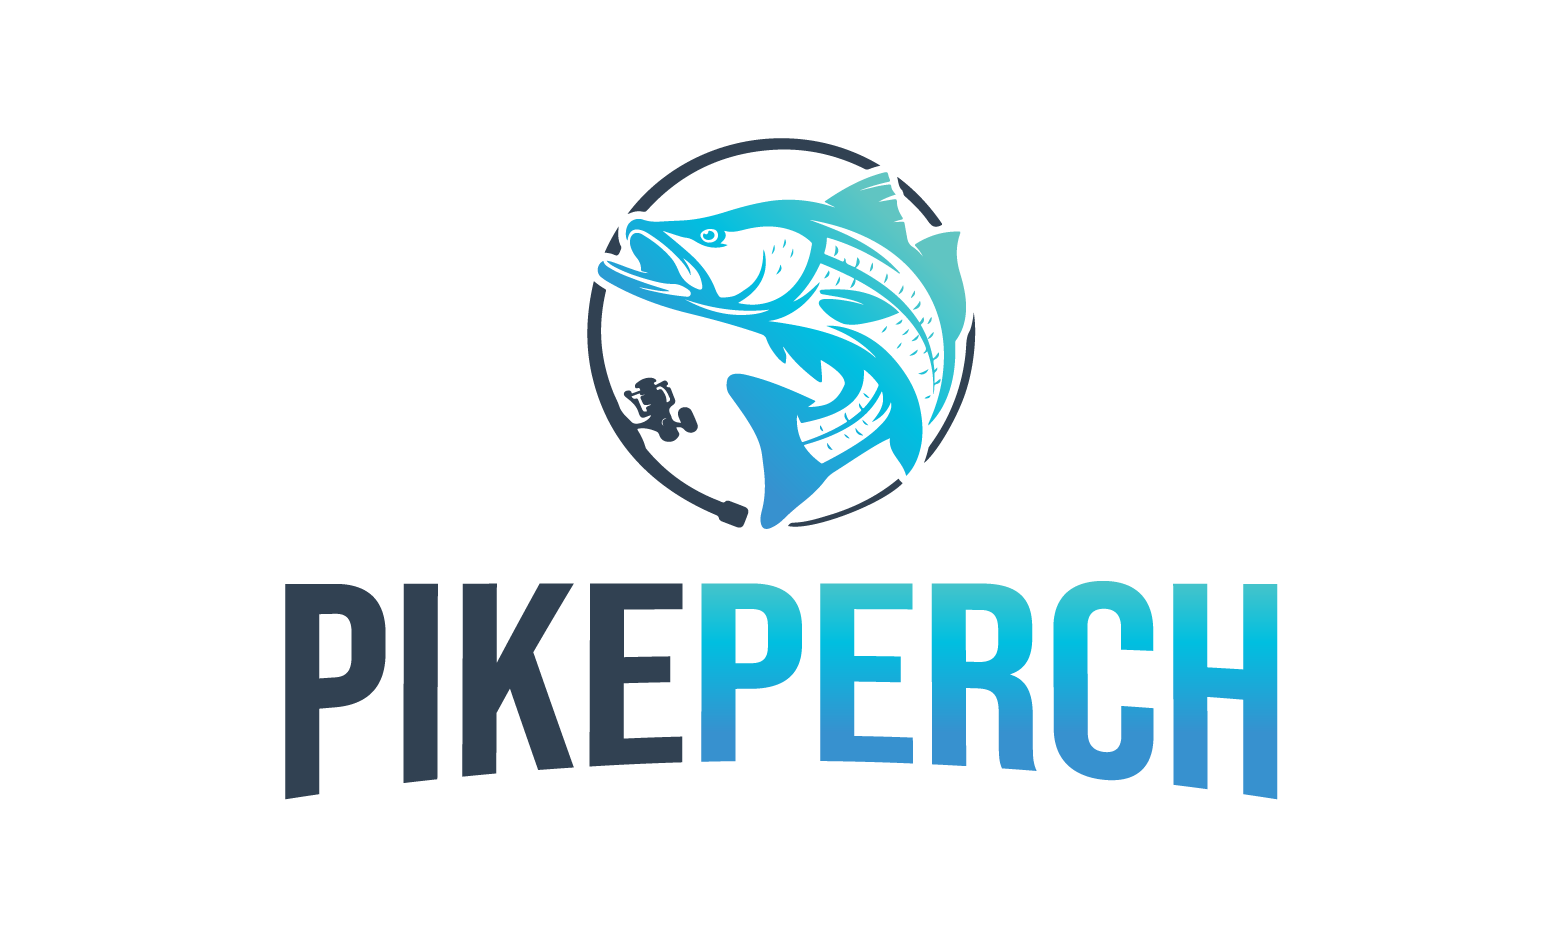 PikePerch.com - Creative brandable domain for sale